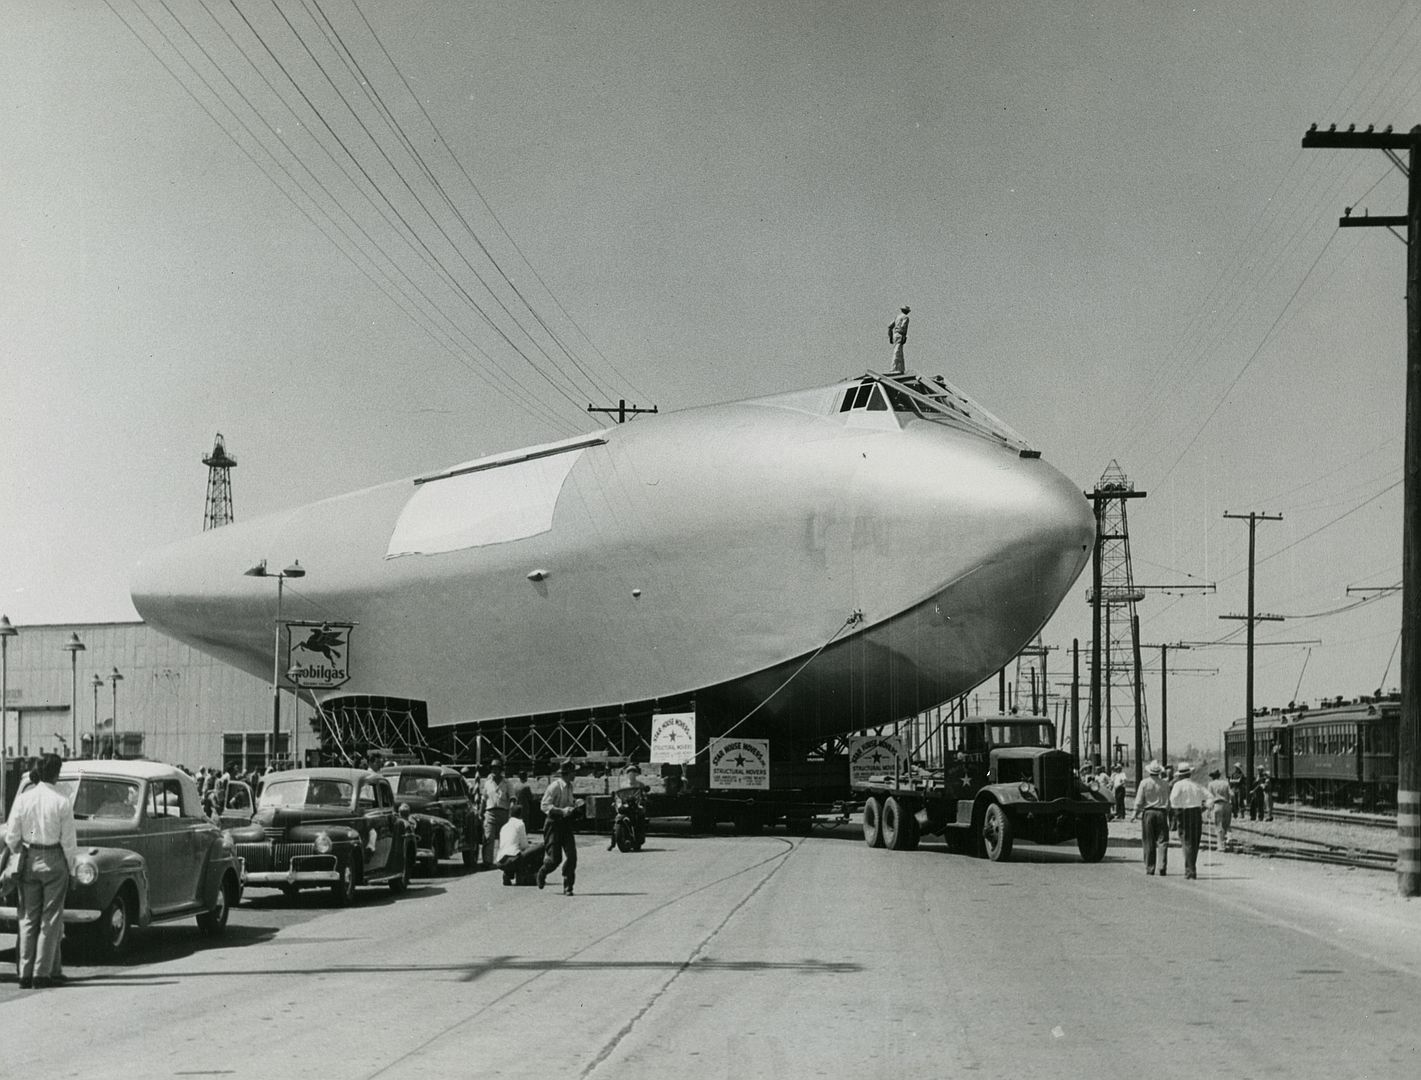 Fuselage Portion Of Hughes Flying Boat Being Moved To Terminal Island In The Los Angeles Harbor 1946 FTDVadwRMABpGX7w9Loj5N